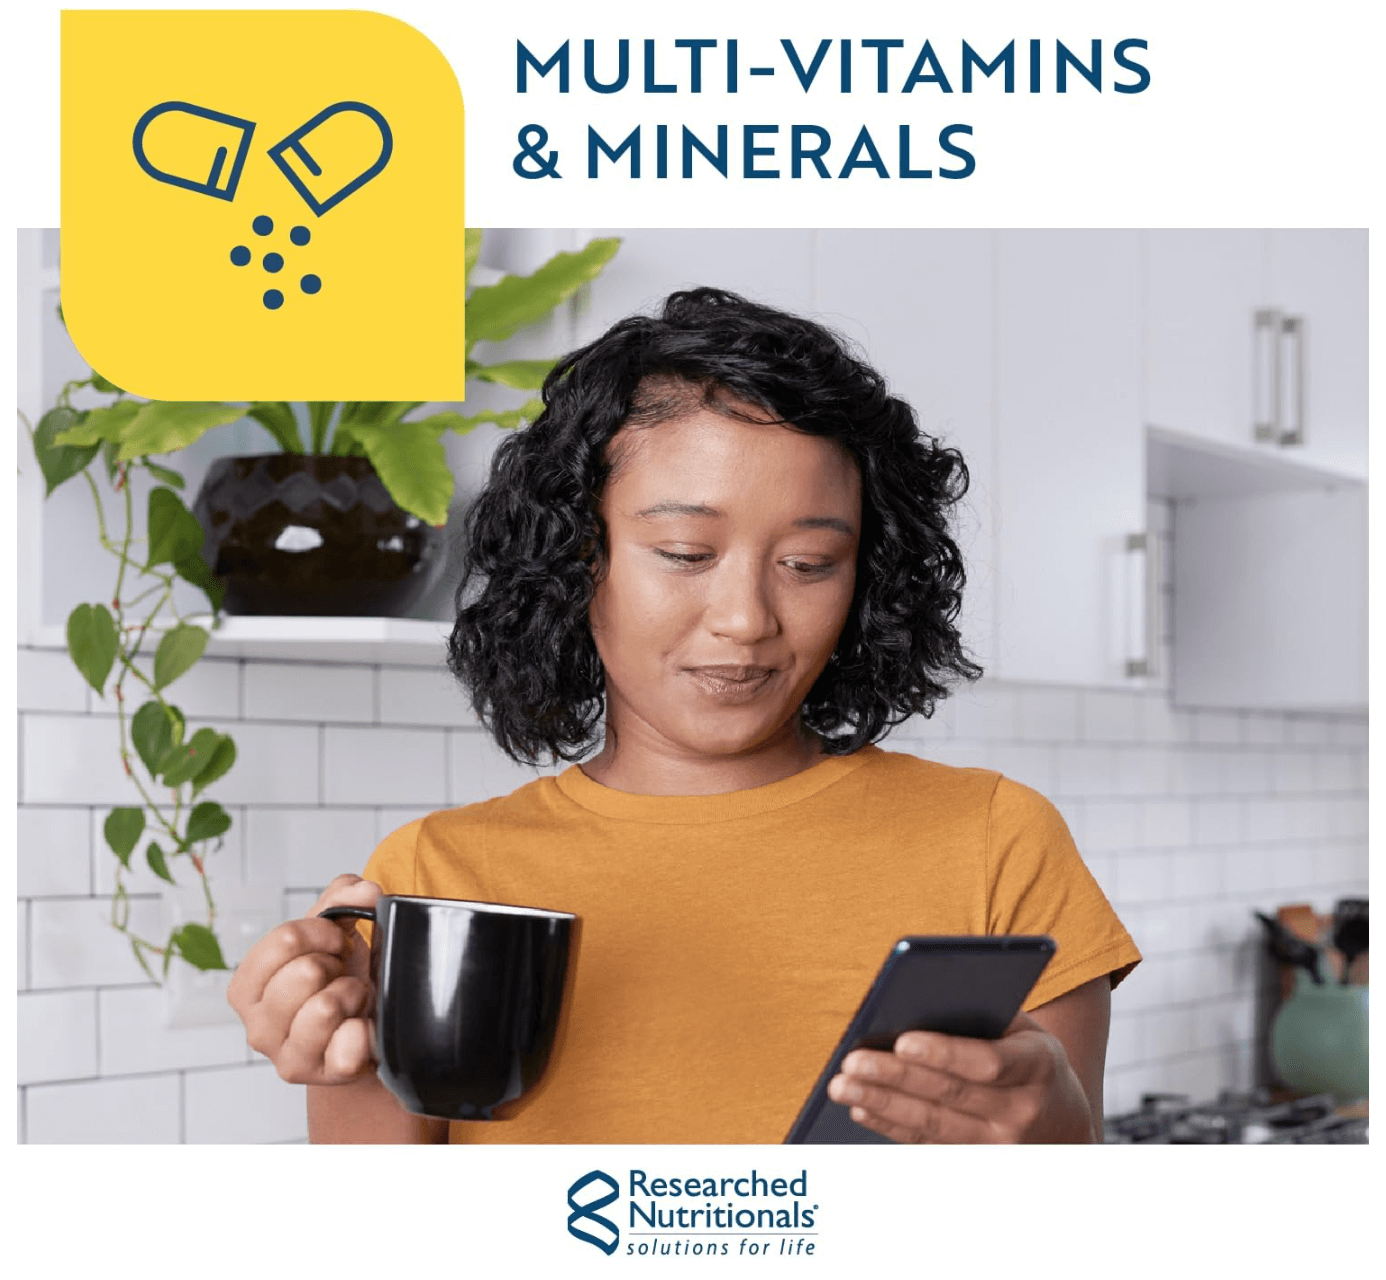 Researched Nutritionals Physician's Daily Multivitamin